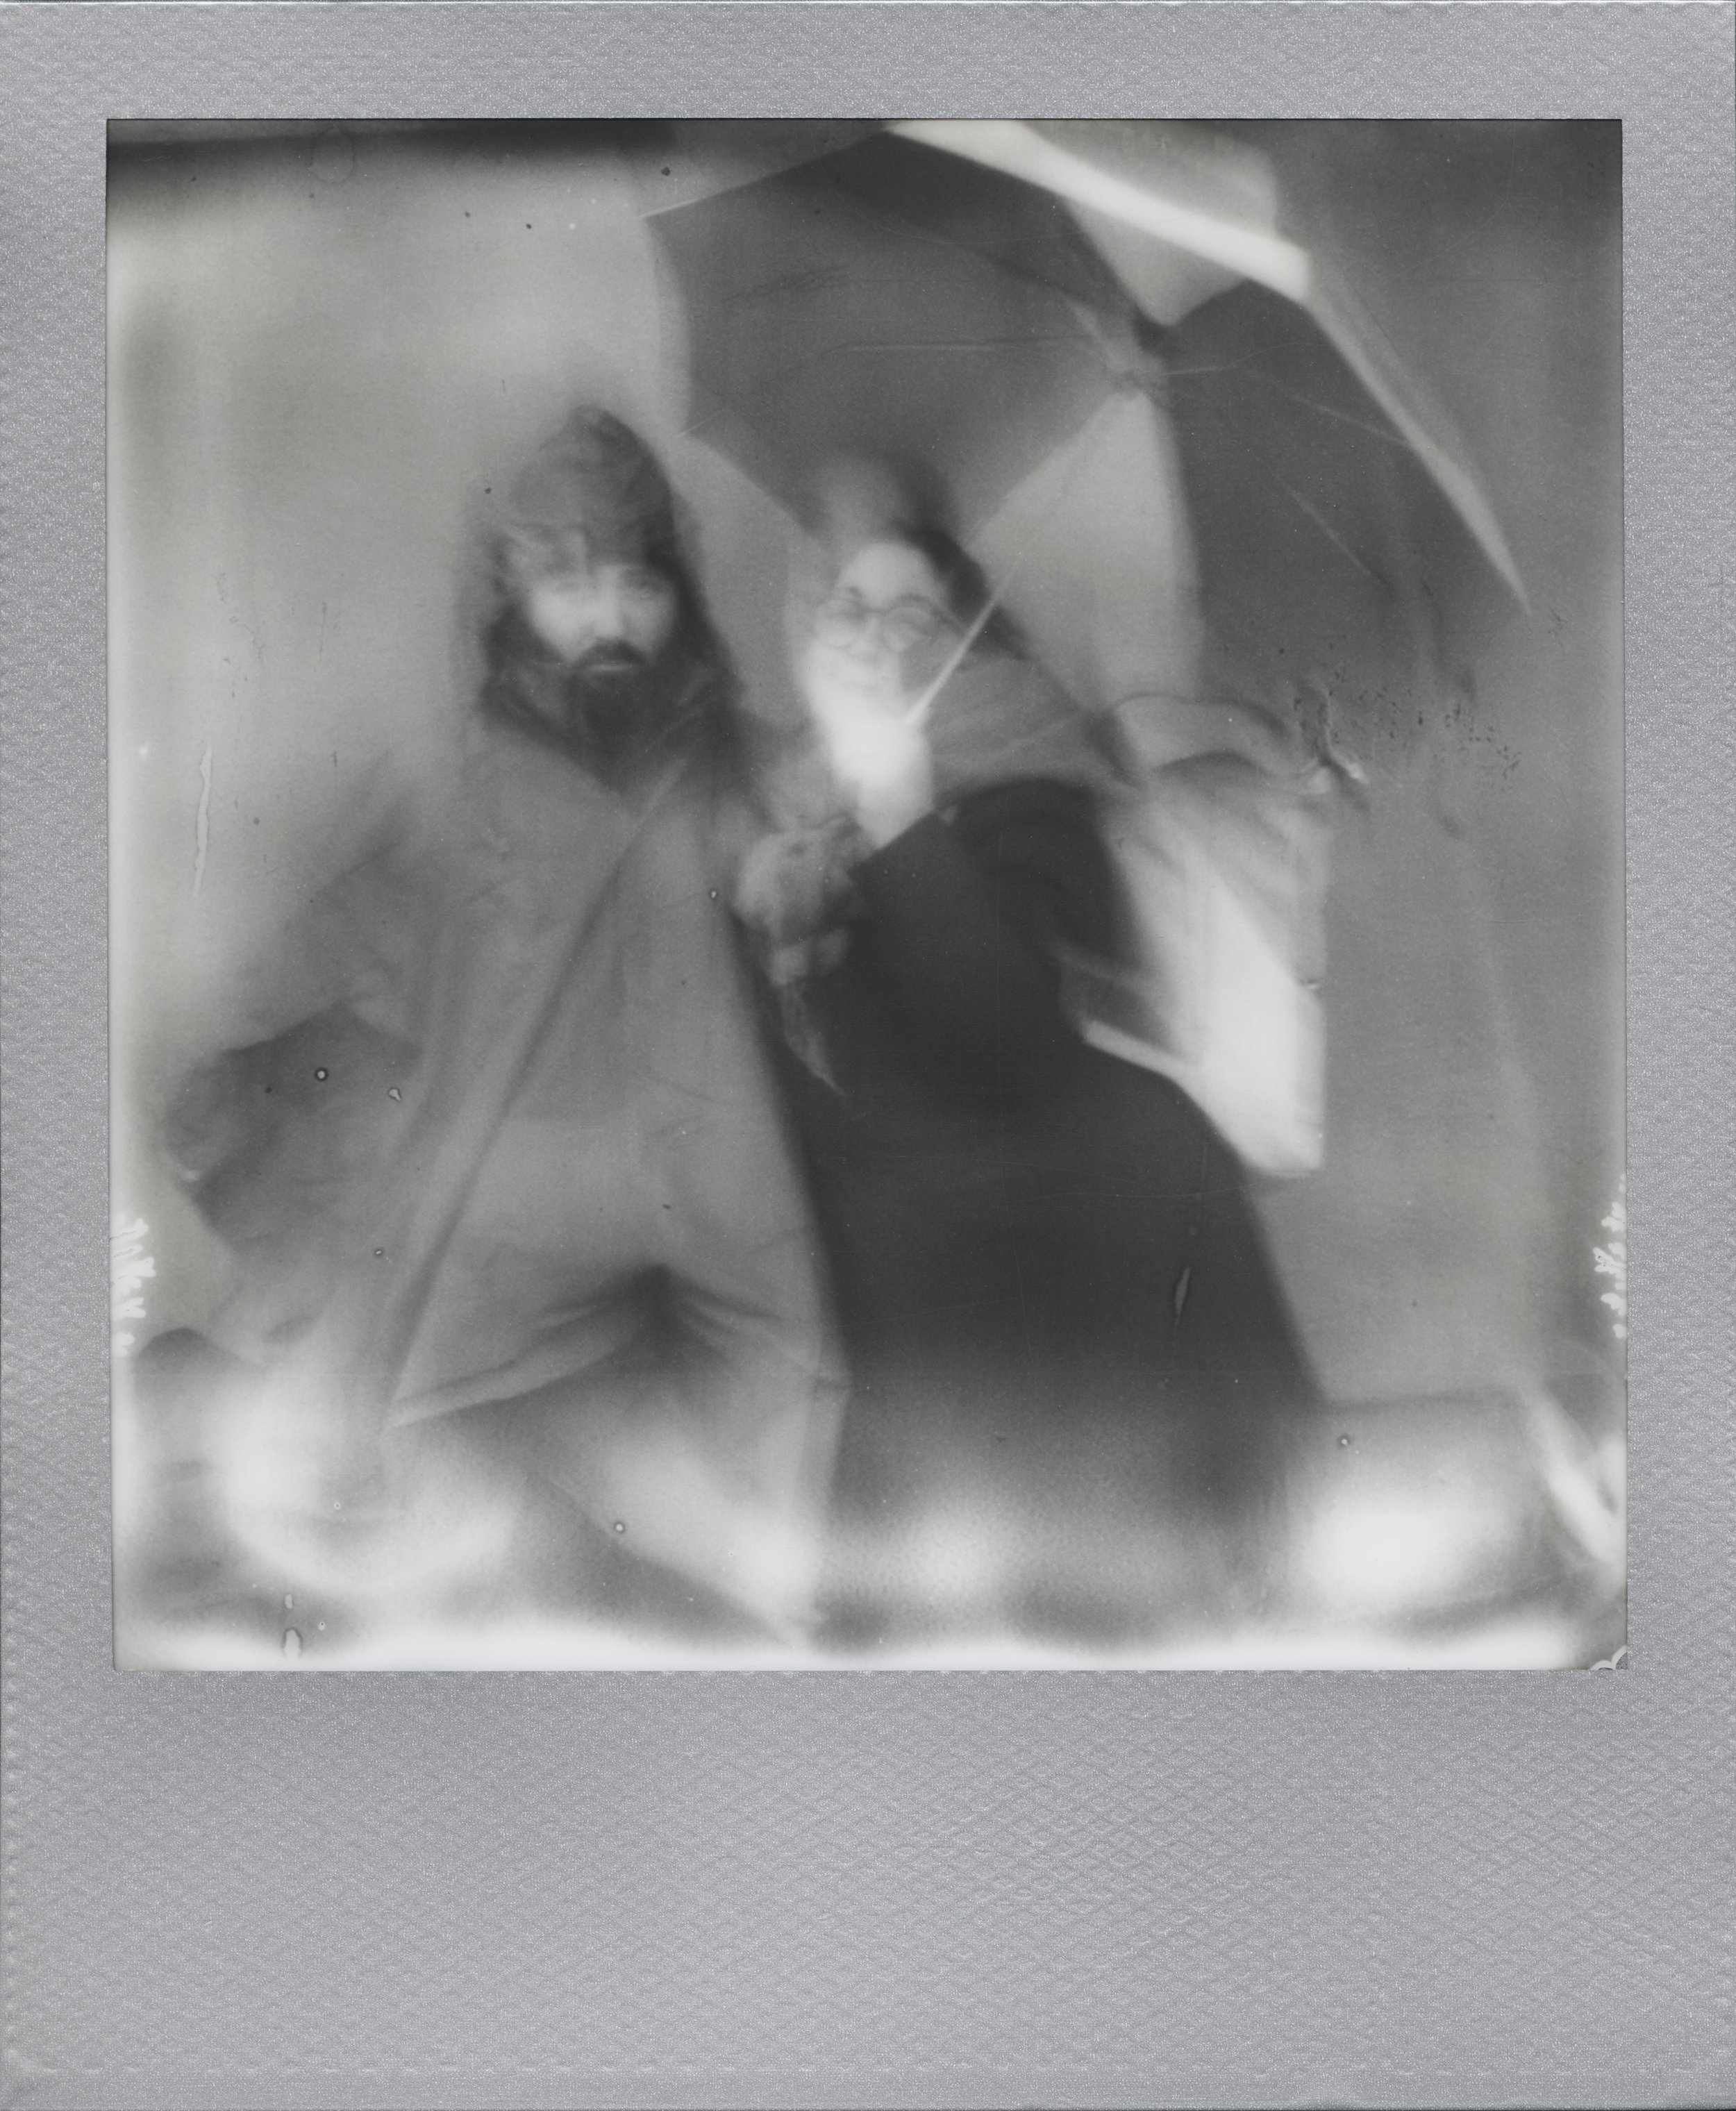 Ye Olden Days Lovers | SX70 | Impossible B&W | Ale Di Gangi